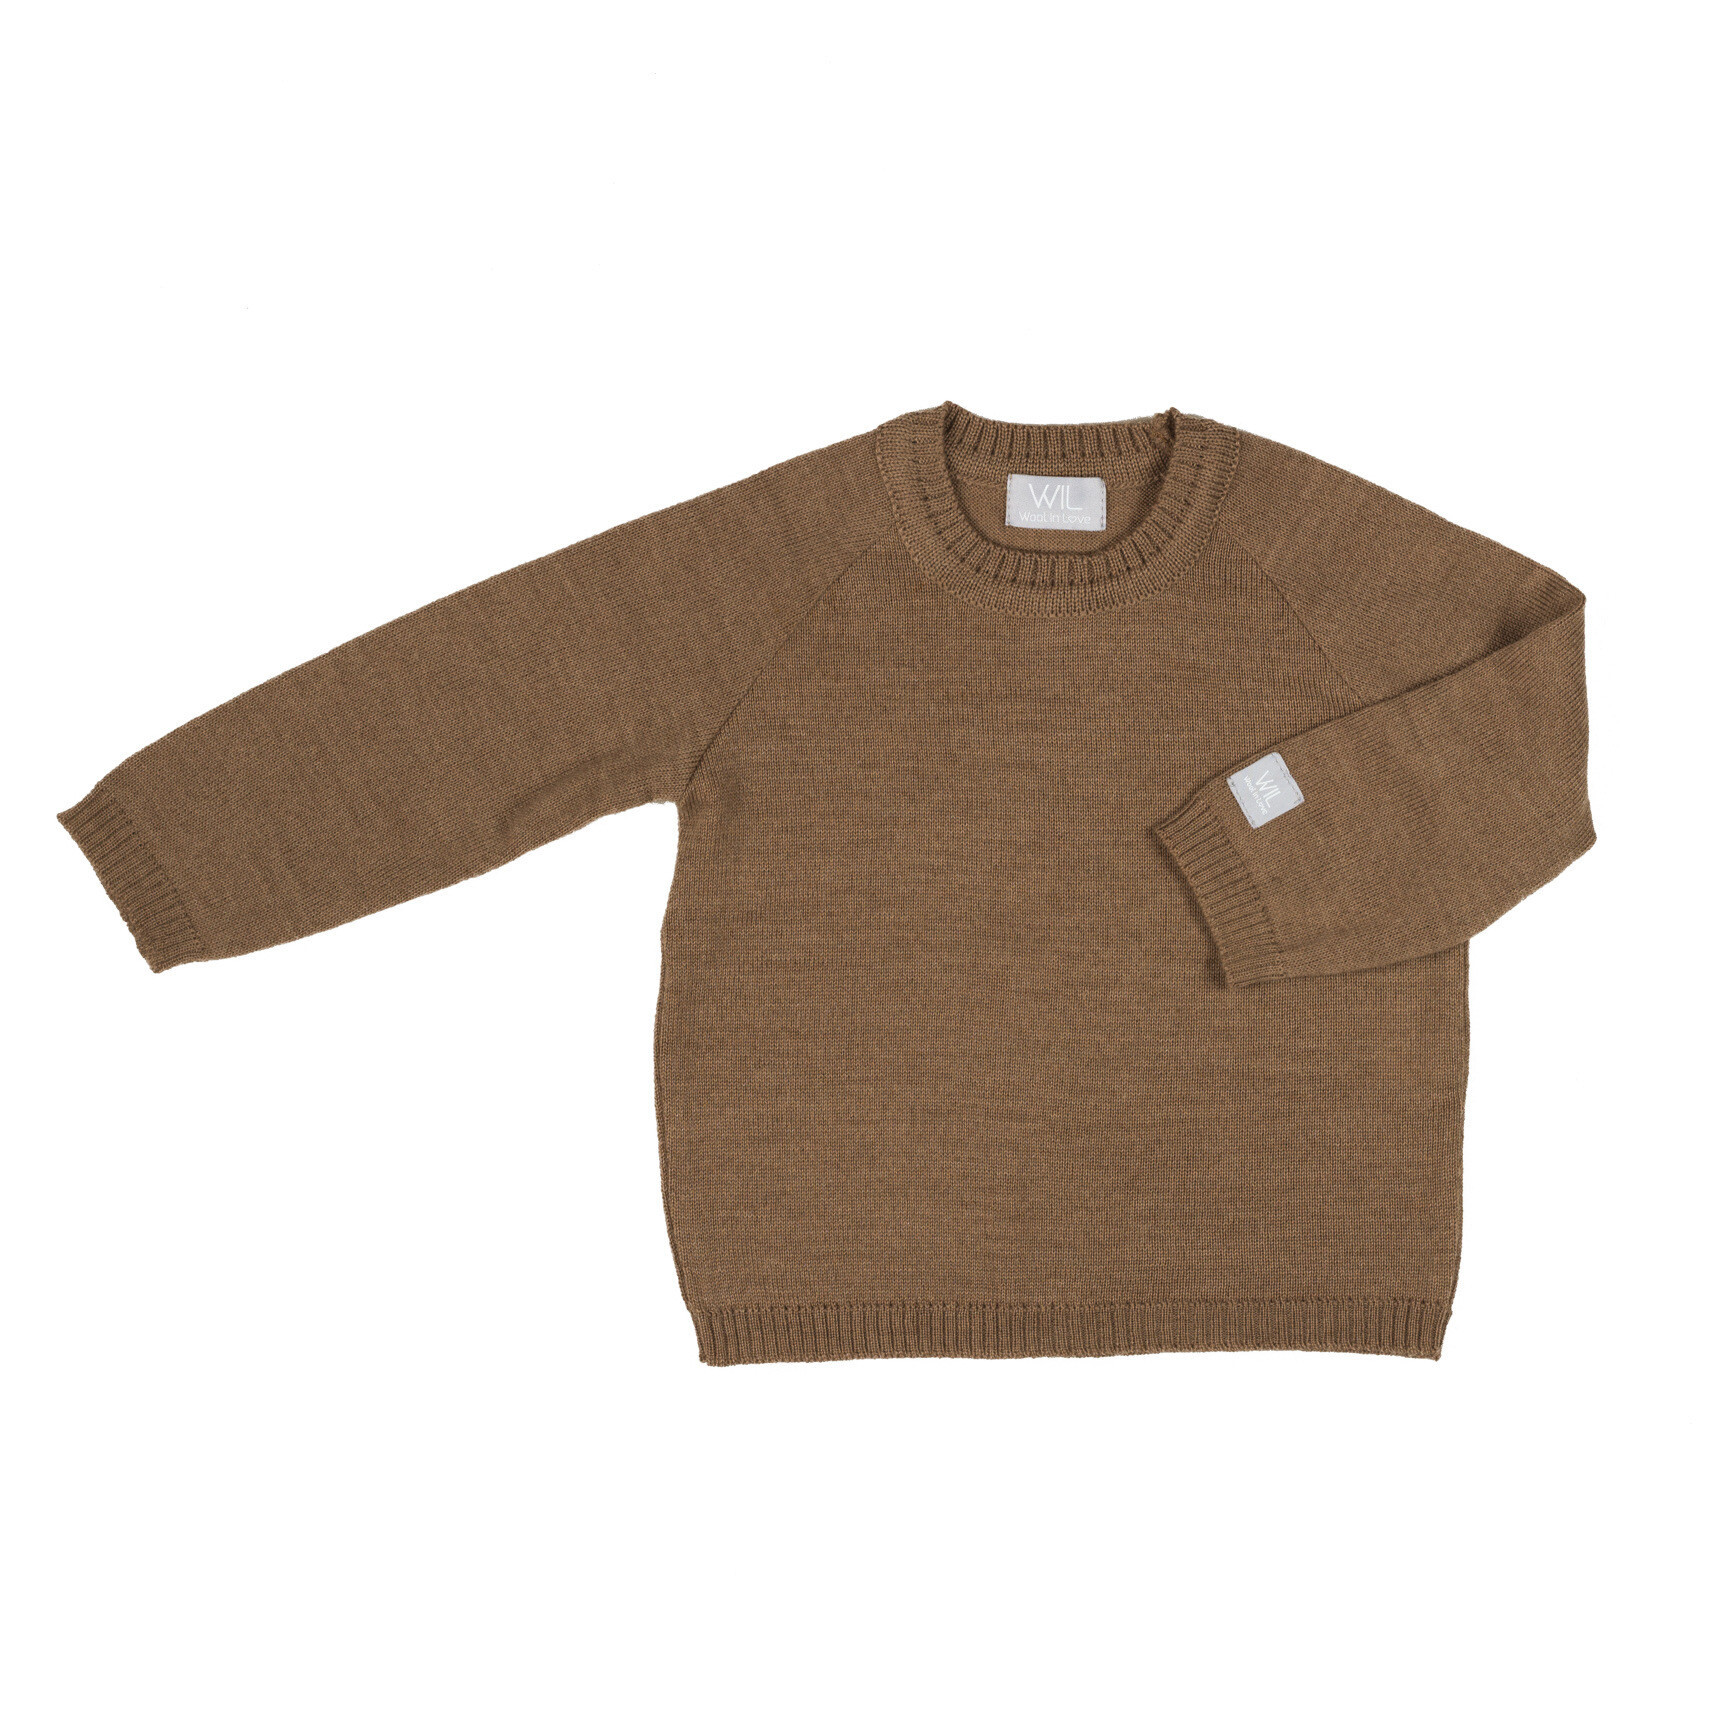 Merino wool kids and baby sweater is light and very soft.  